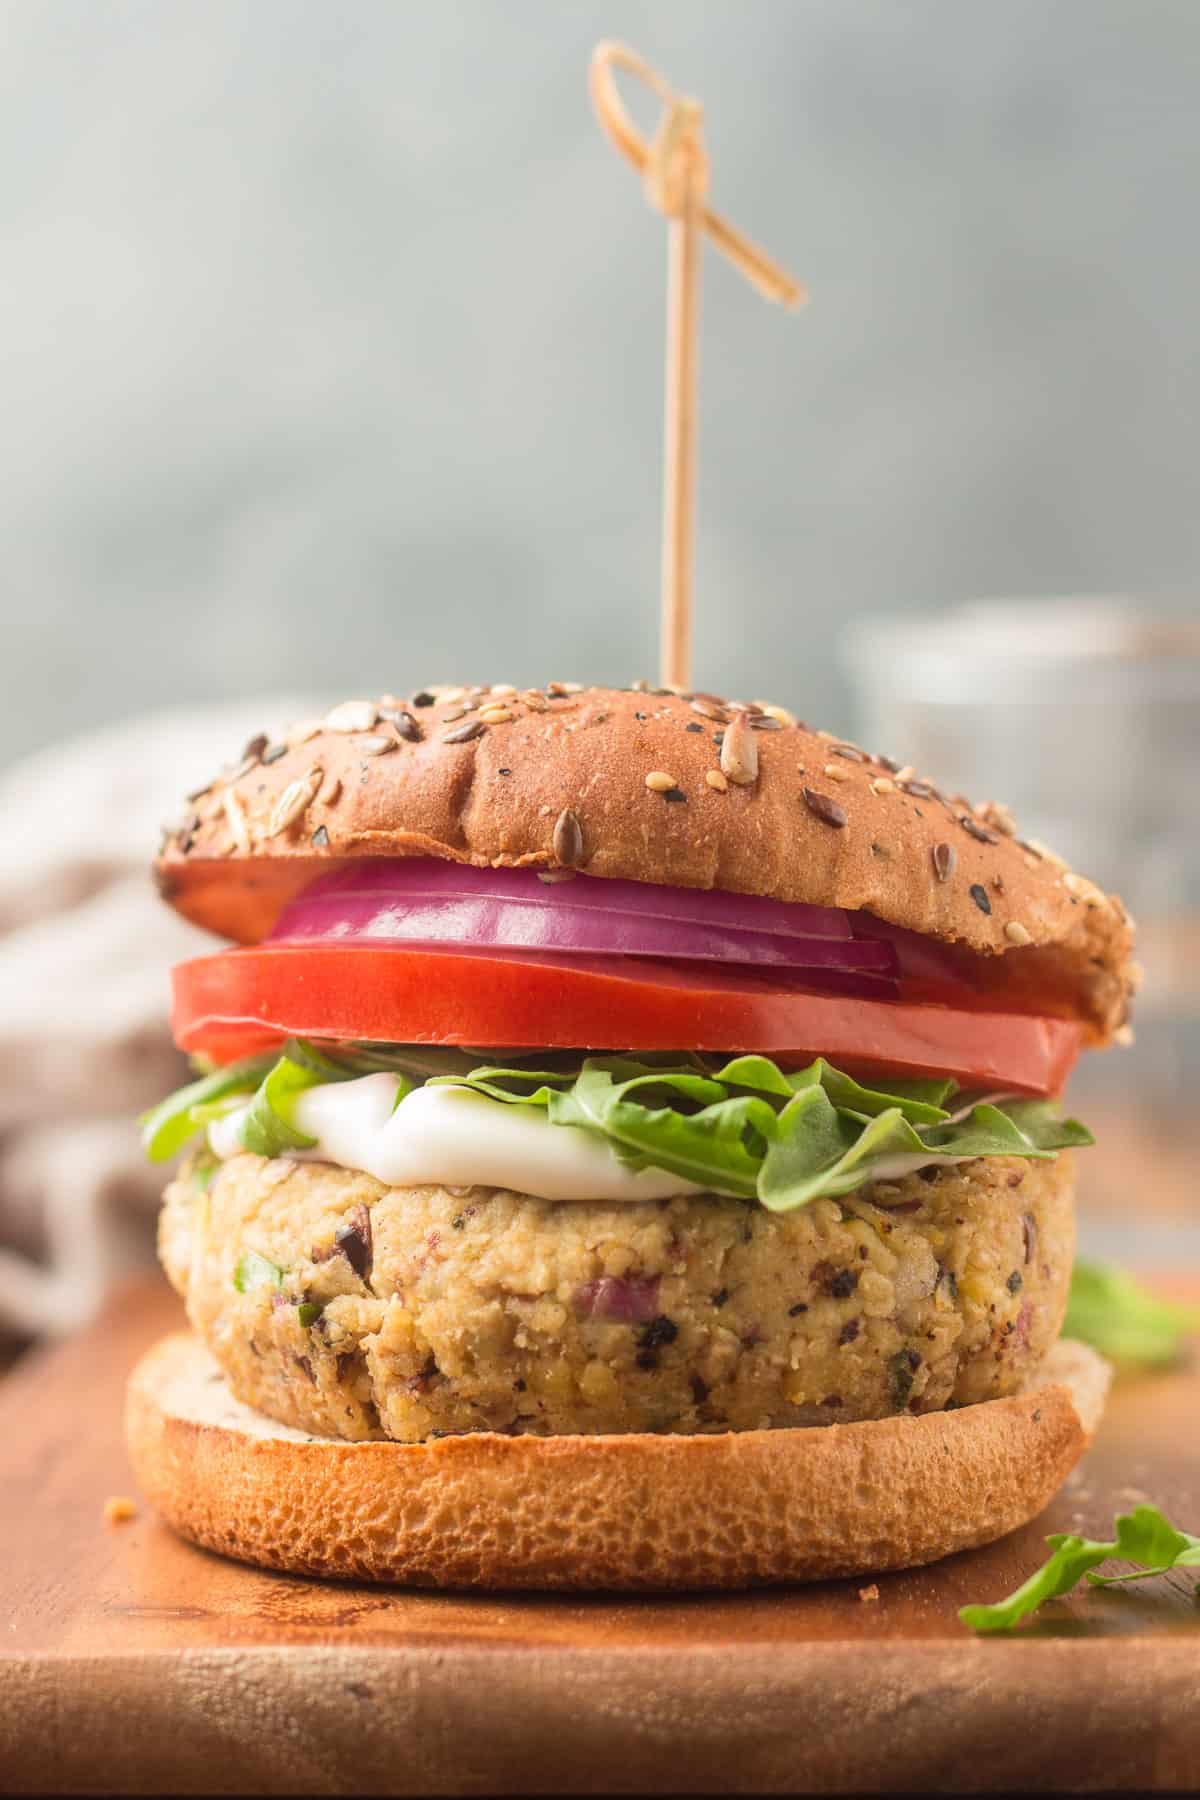 Greek Chickpea Burger with a Skewer Through It